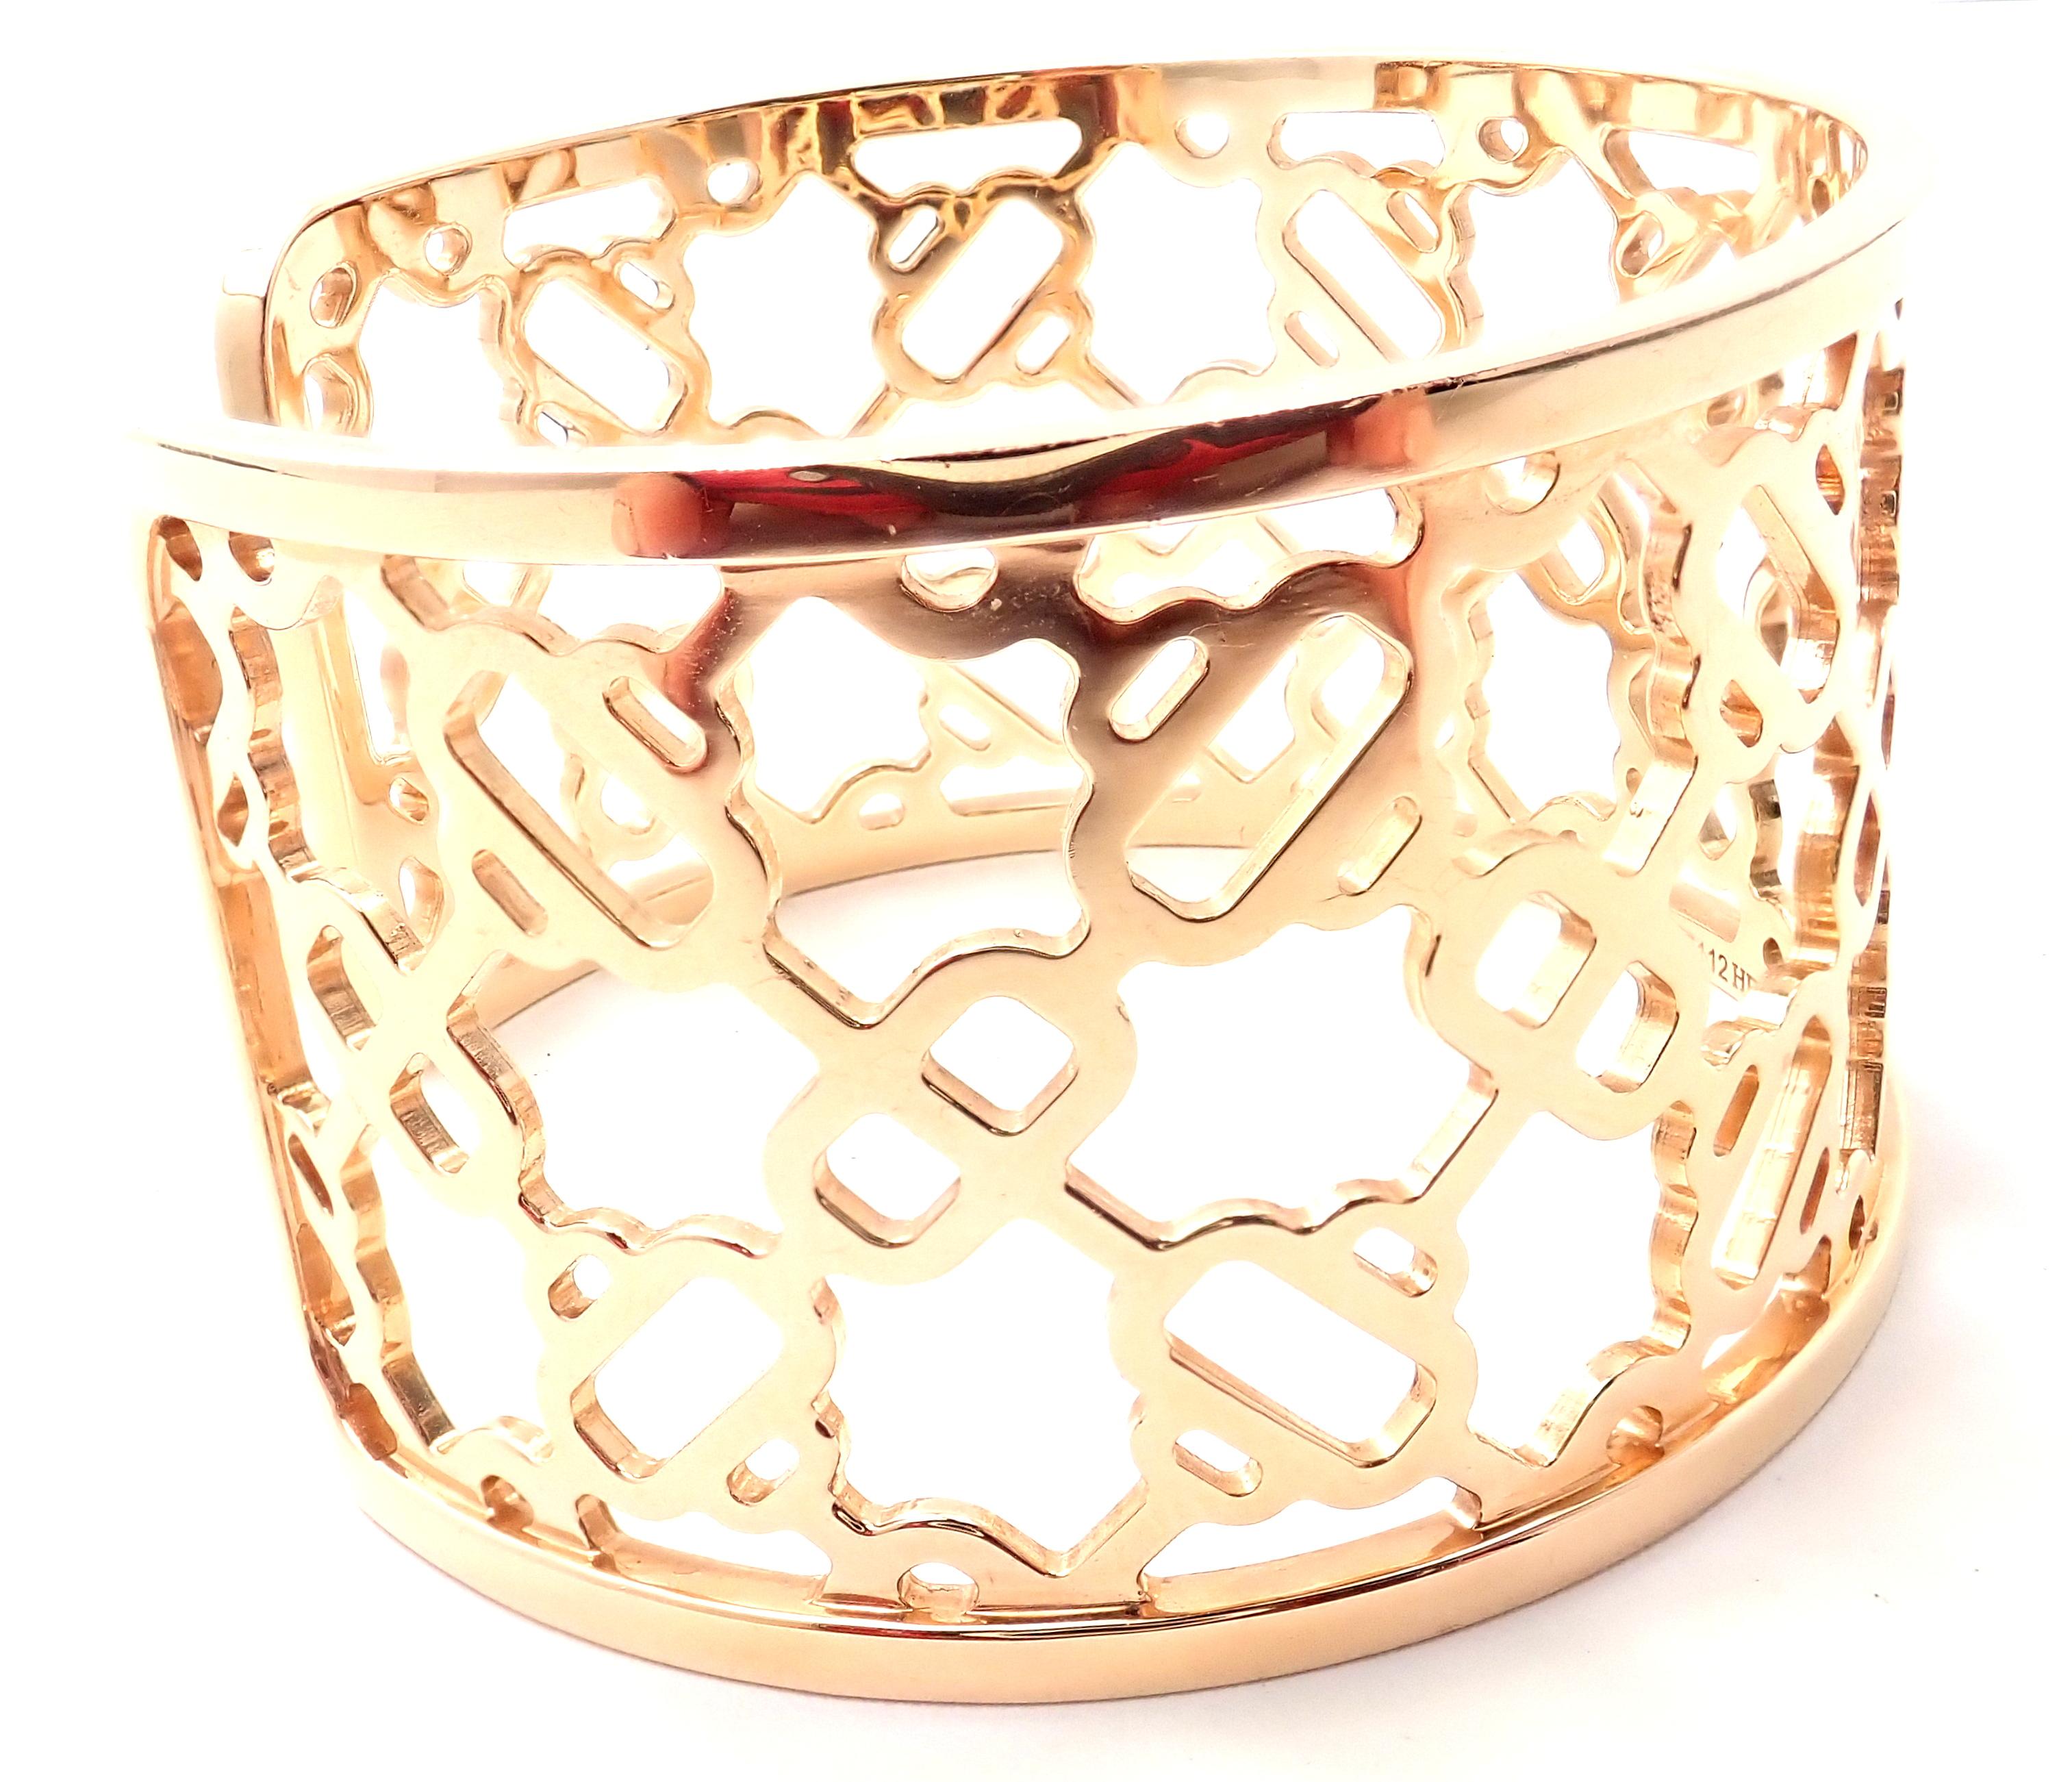 18k Rose Gold Chaine d'Ancre Passerelle Cuff Bangle Bracelet by Hermes. 
Details: 
Size: Length: 6